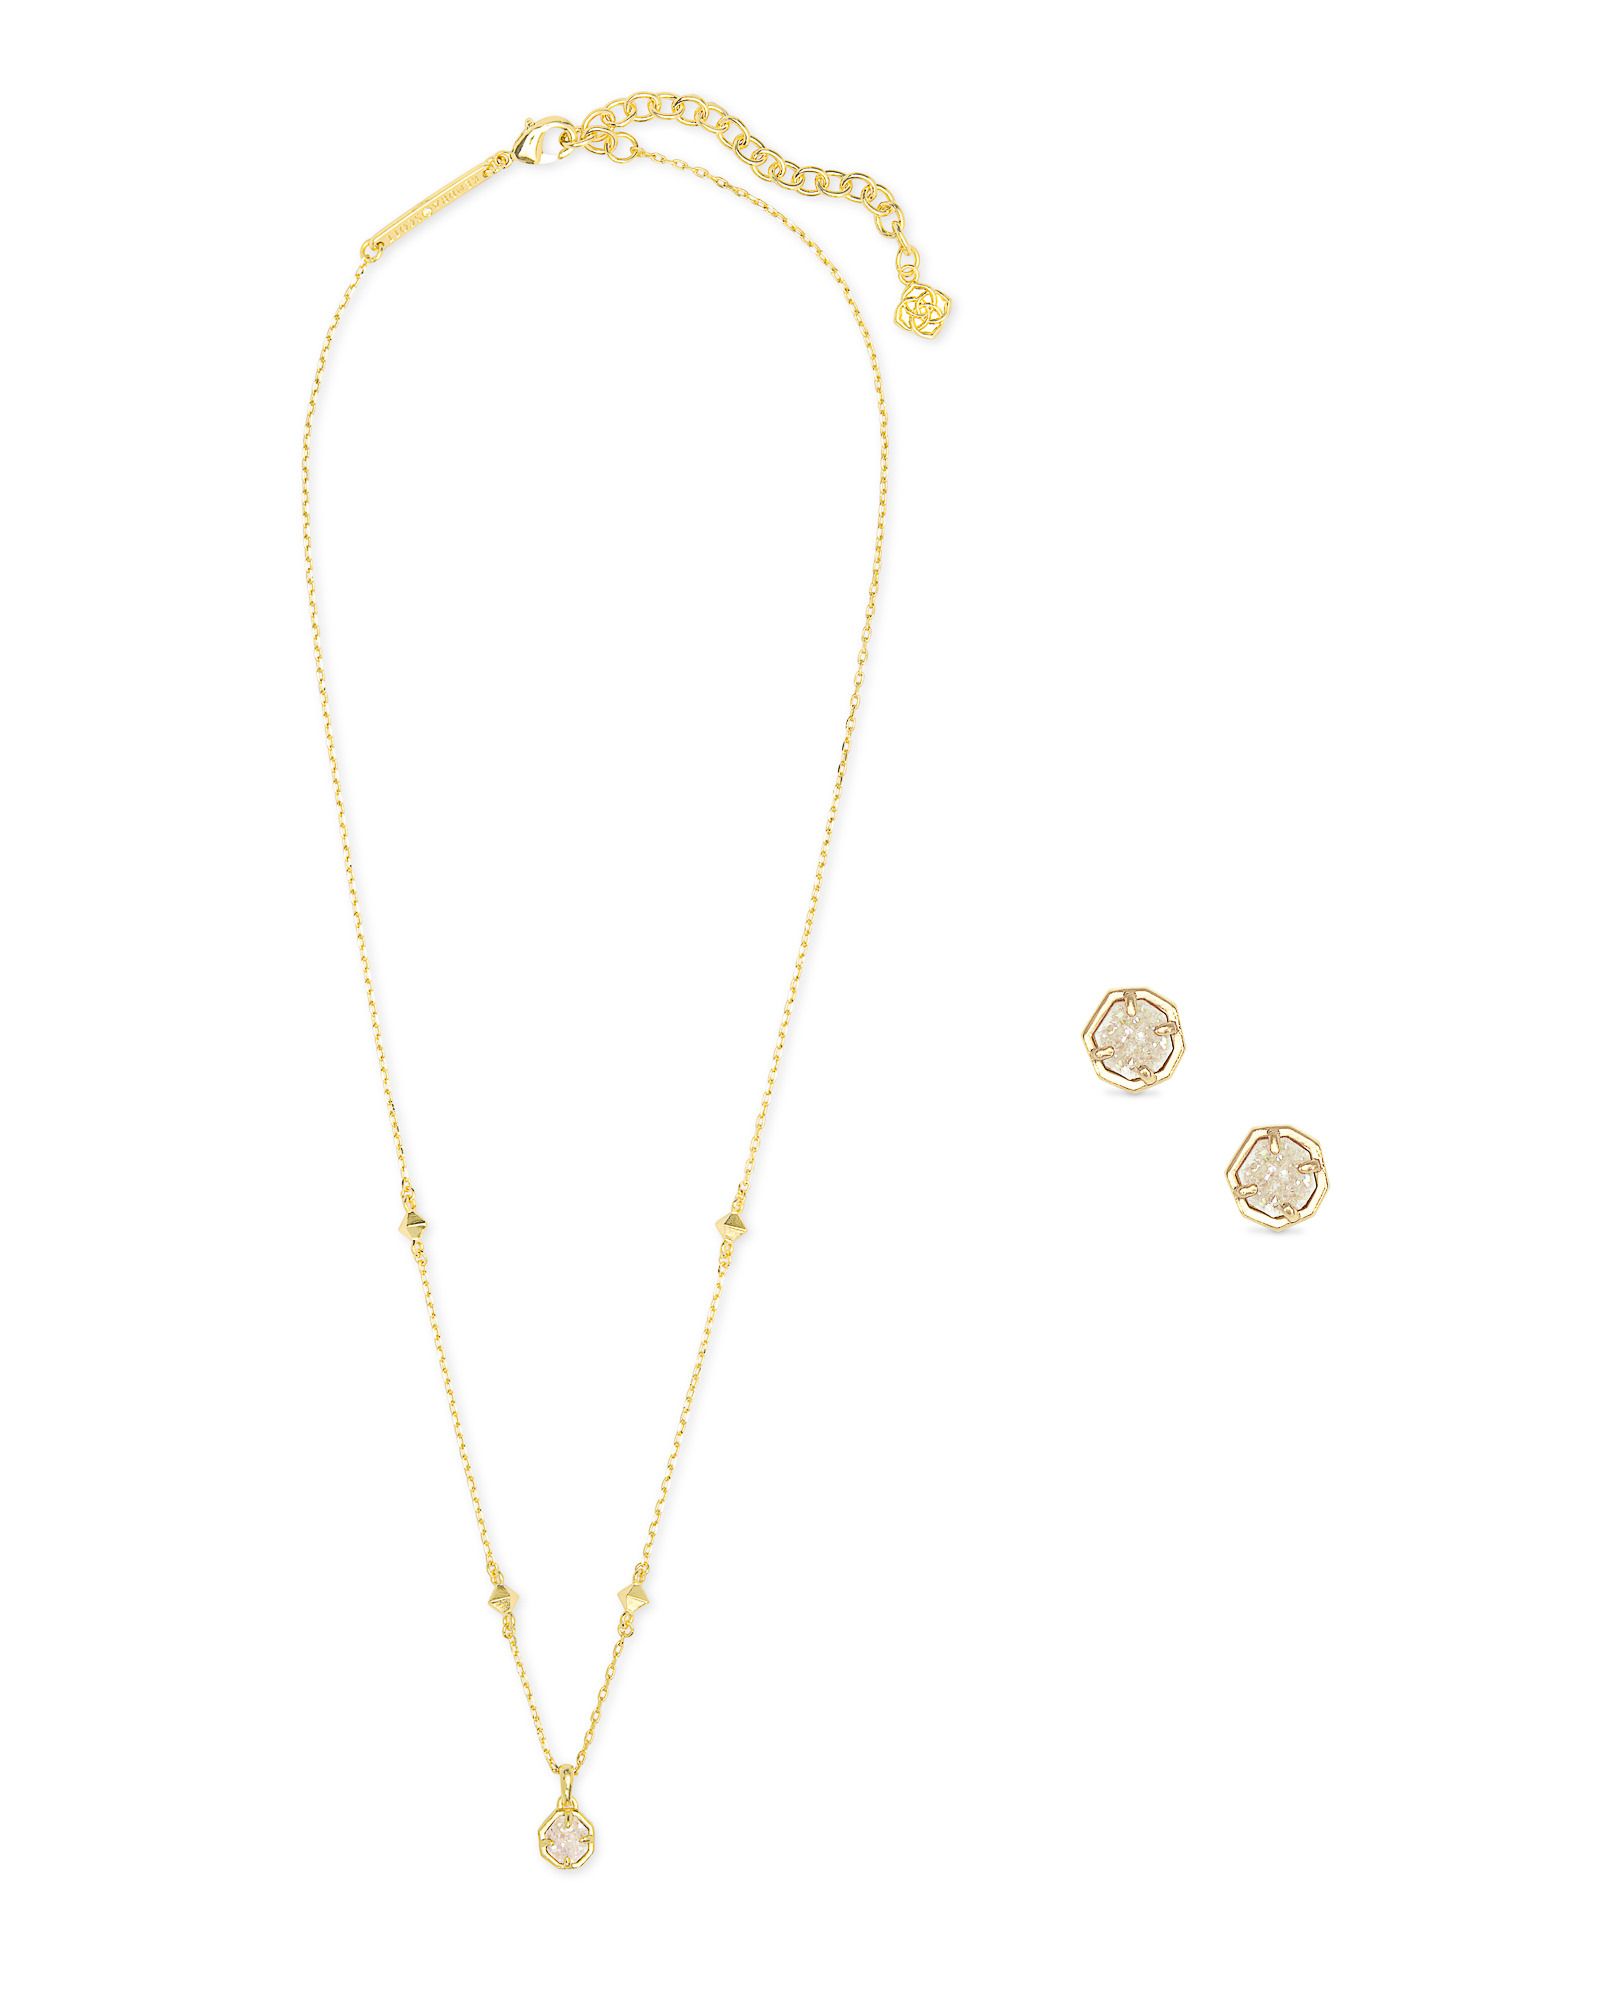 Nola Gold Necklace & Earrings Gift Set in Iridescent Drusy | Kendra Scott